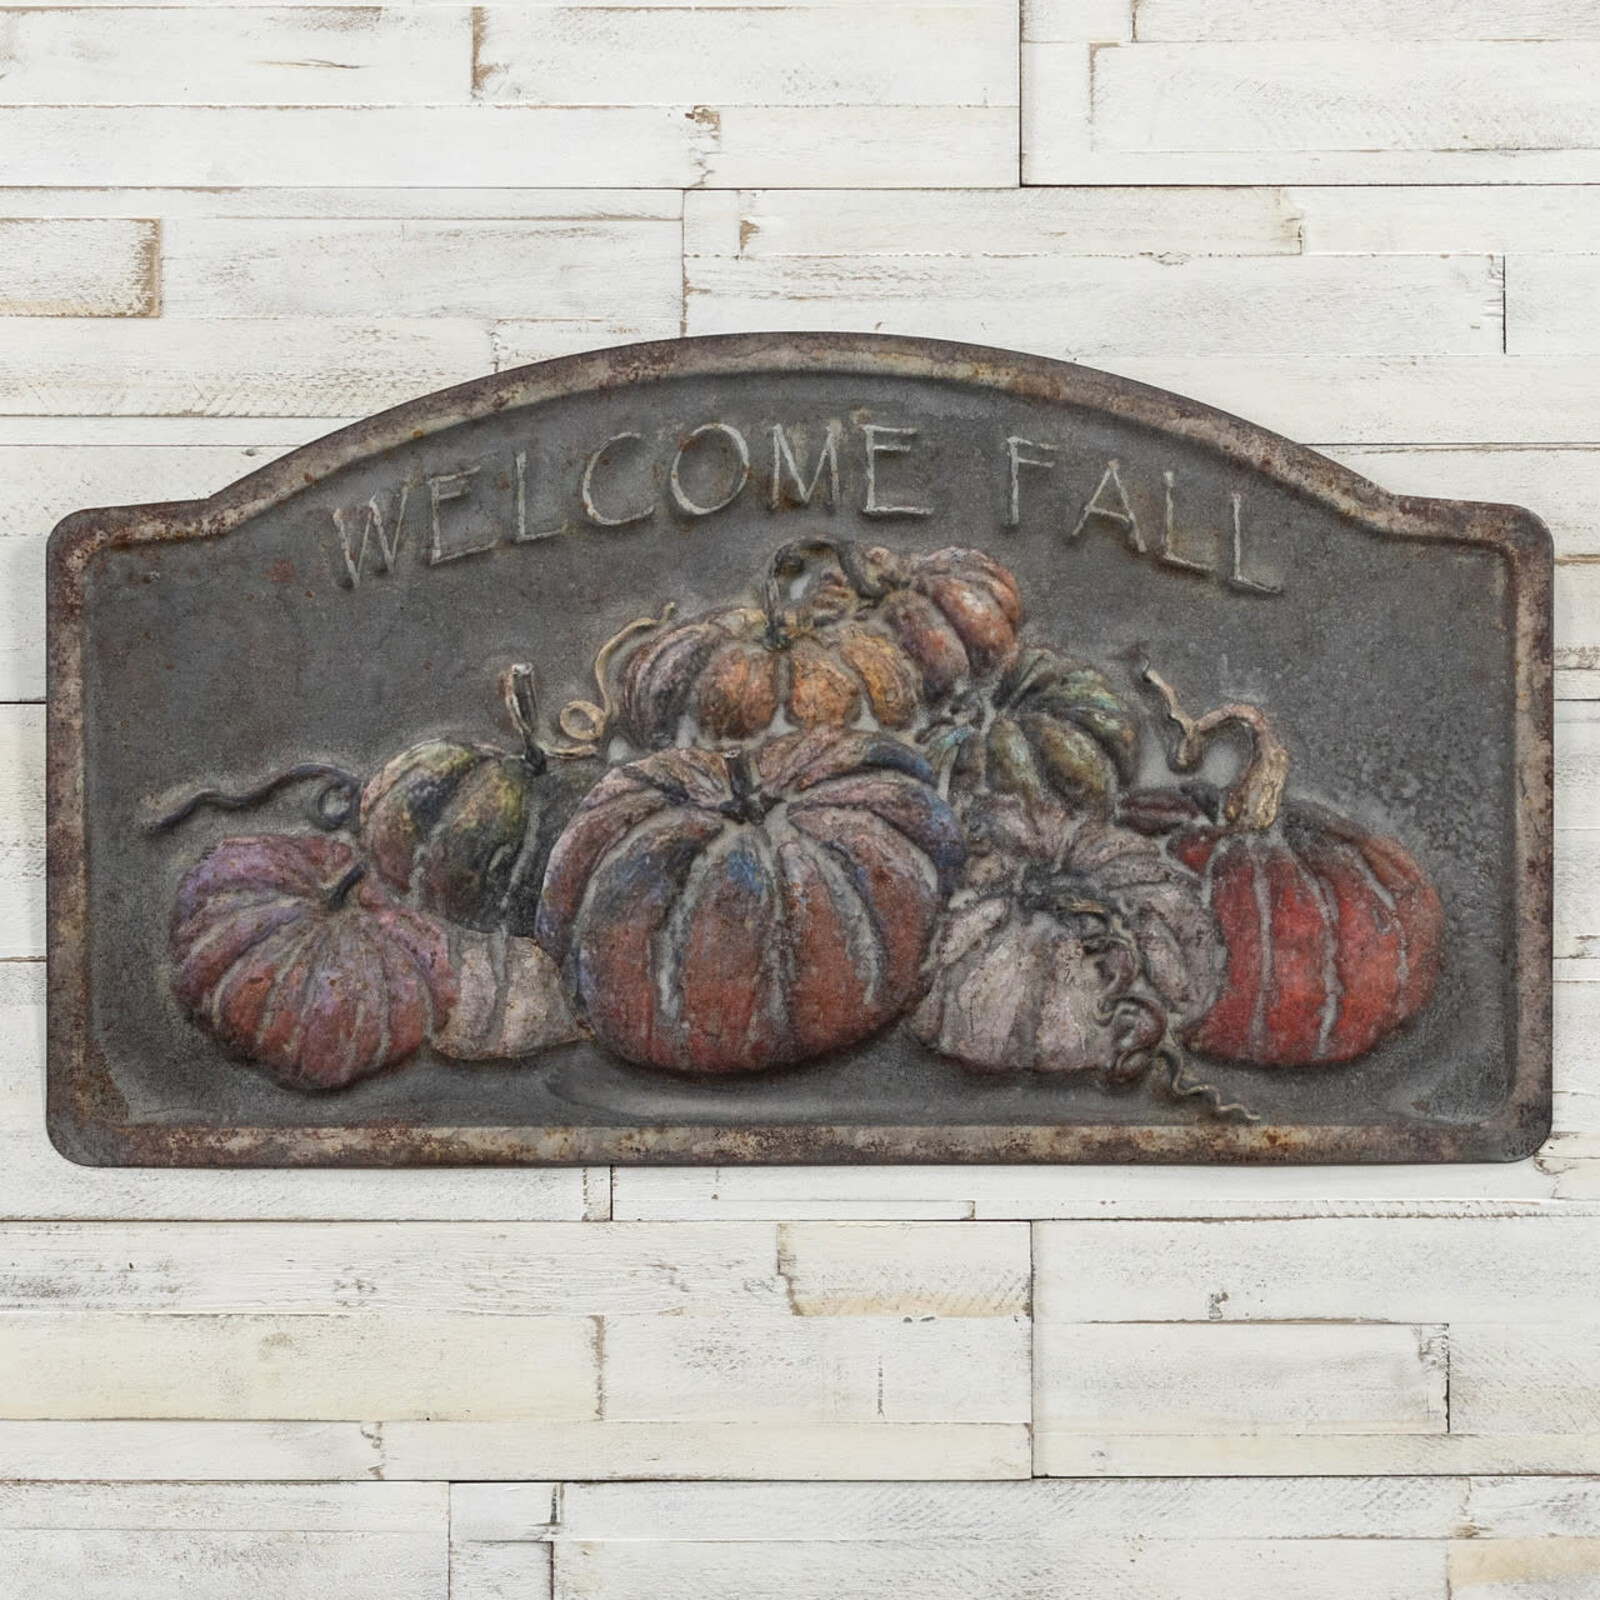 Ragon House 24" WELCOME FALL SIGN    H185080 loading=